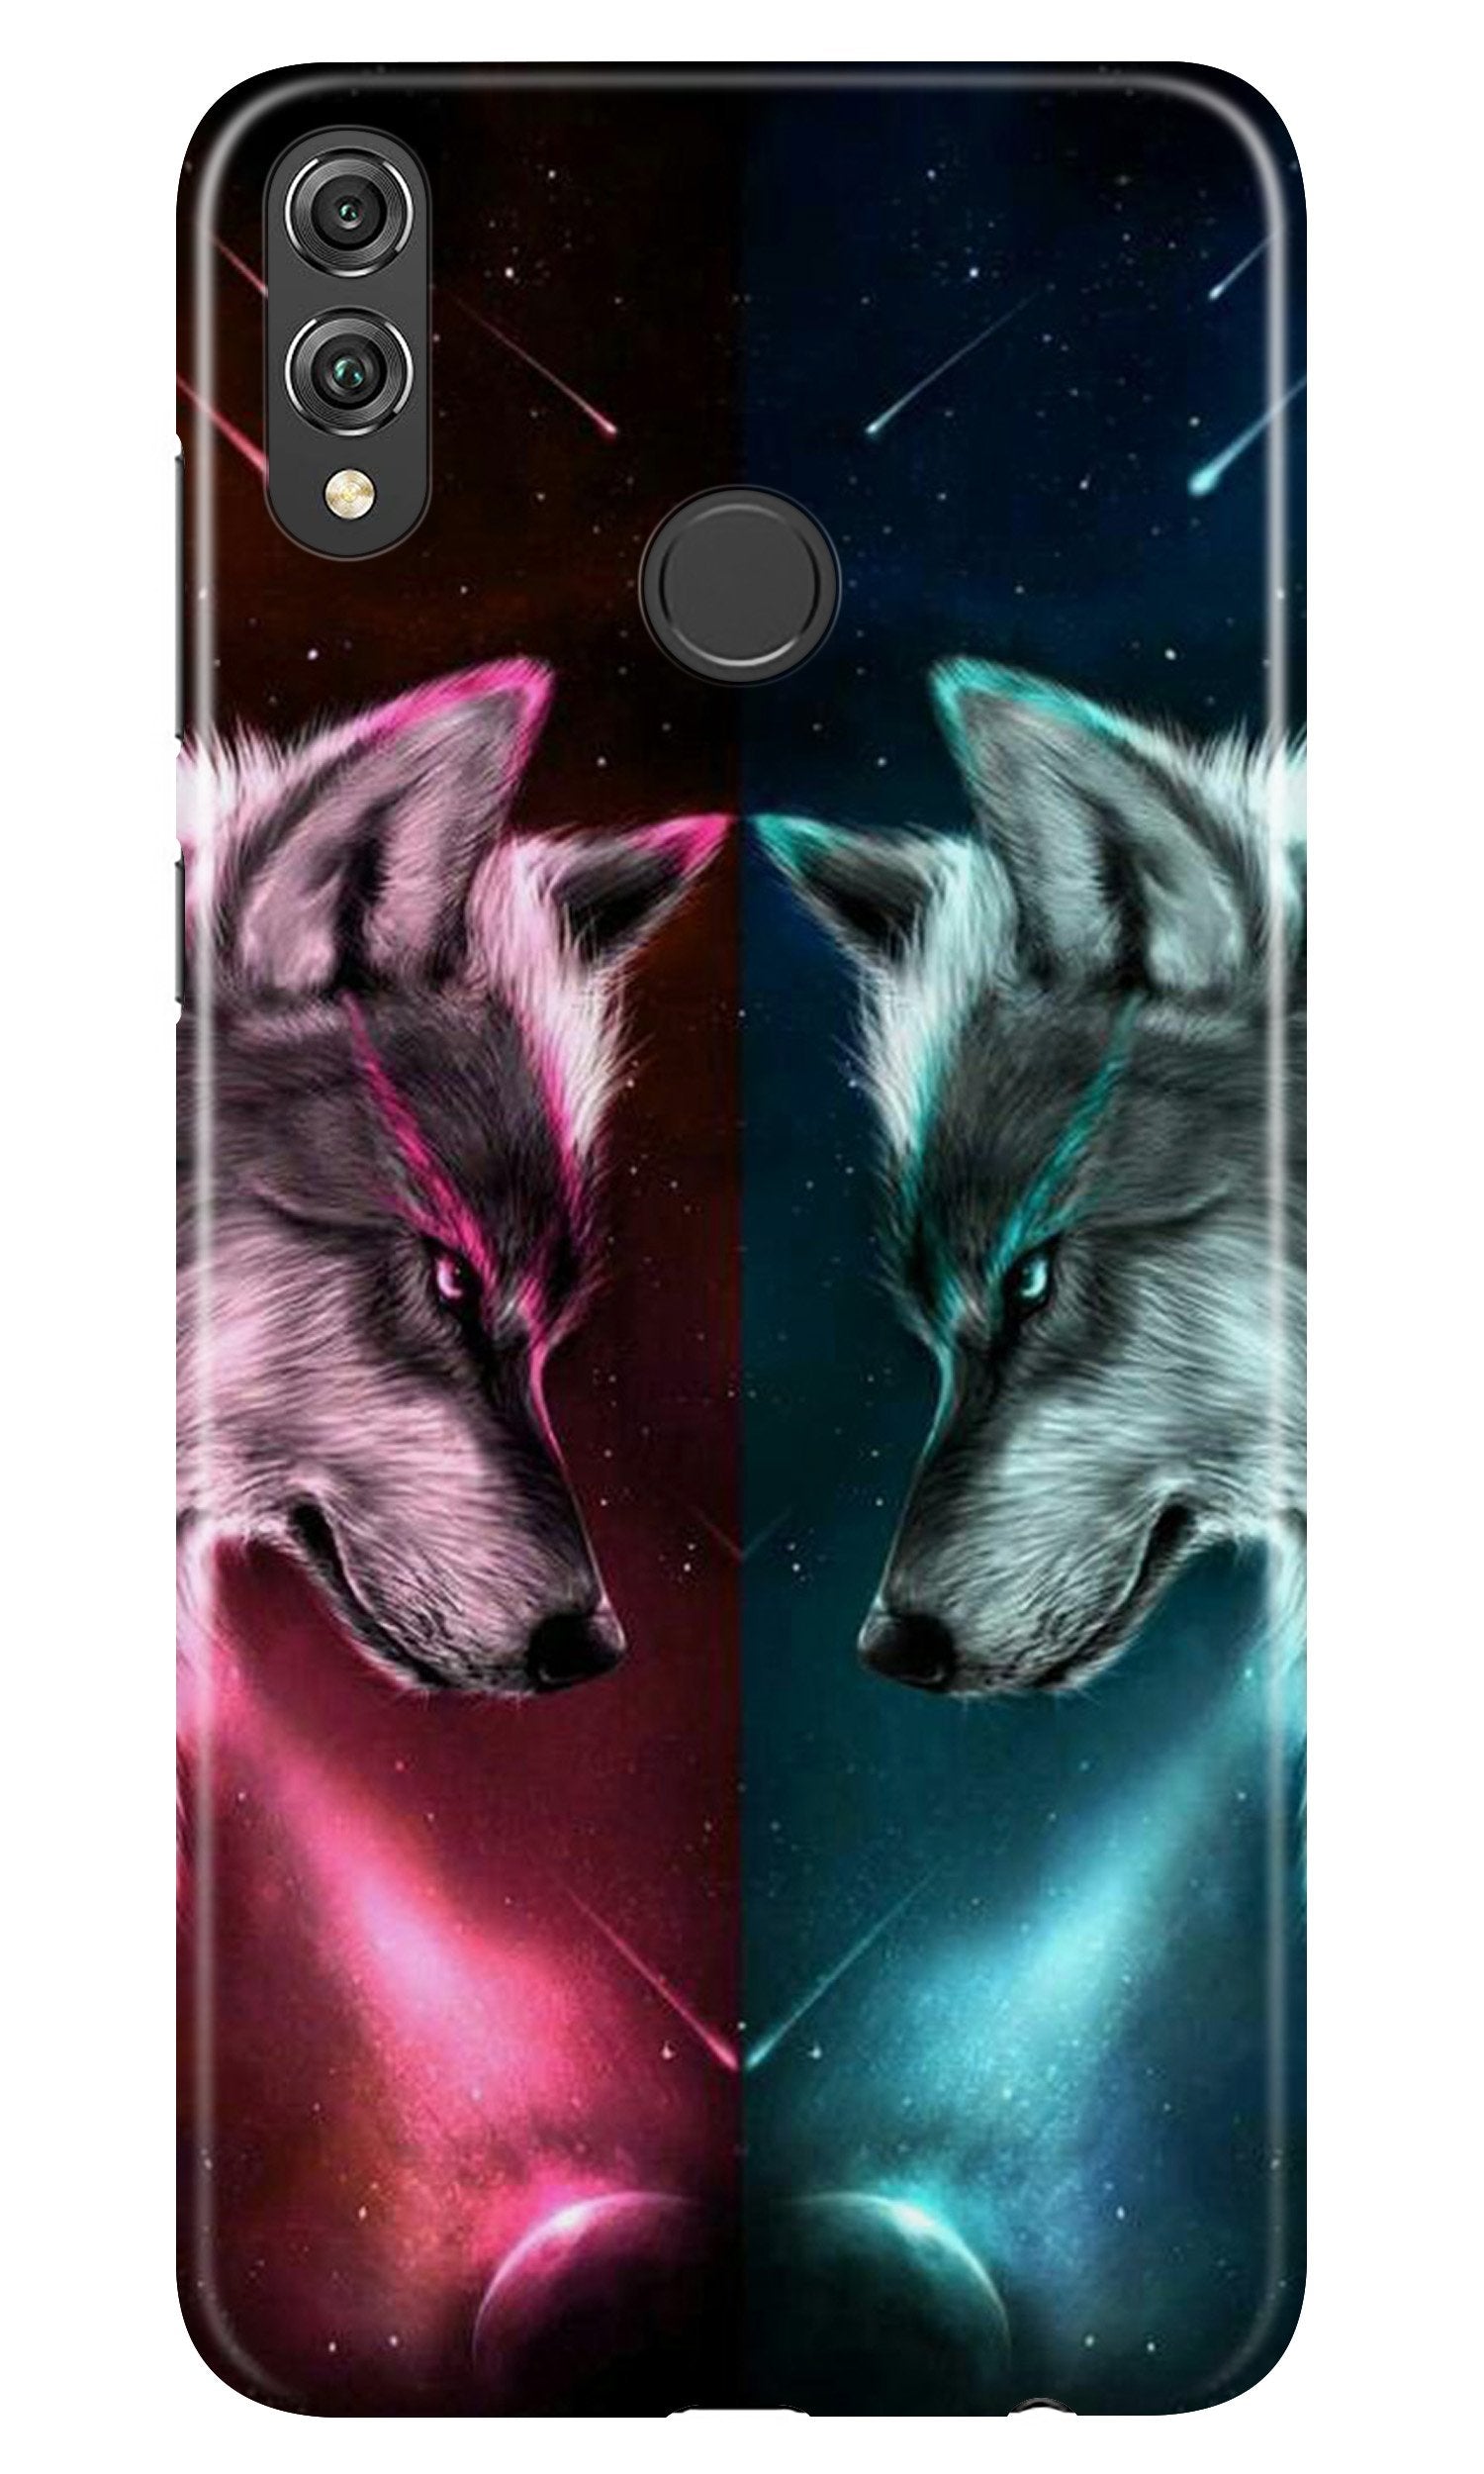 Wolf fight Case for Infinix Hot 7 Pro (Design No. 221)